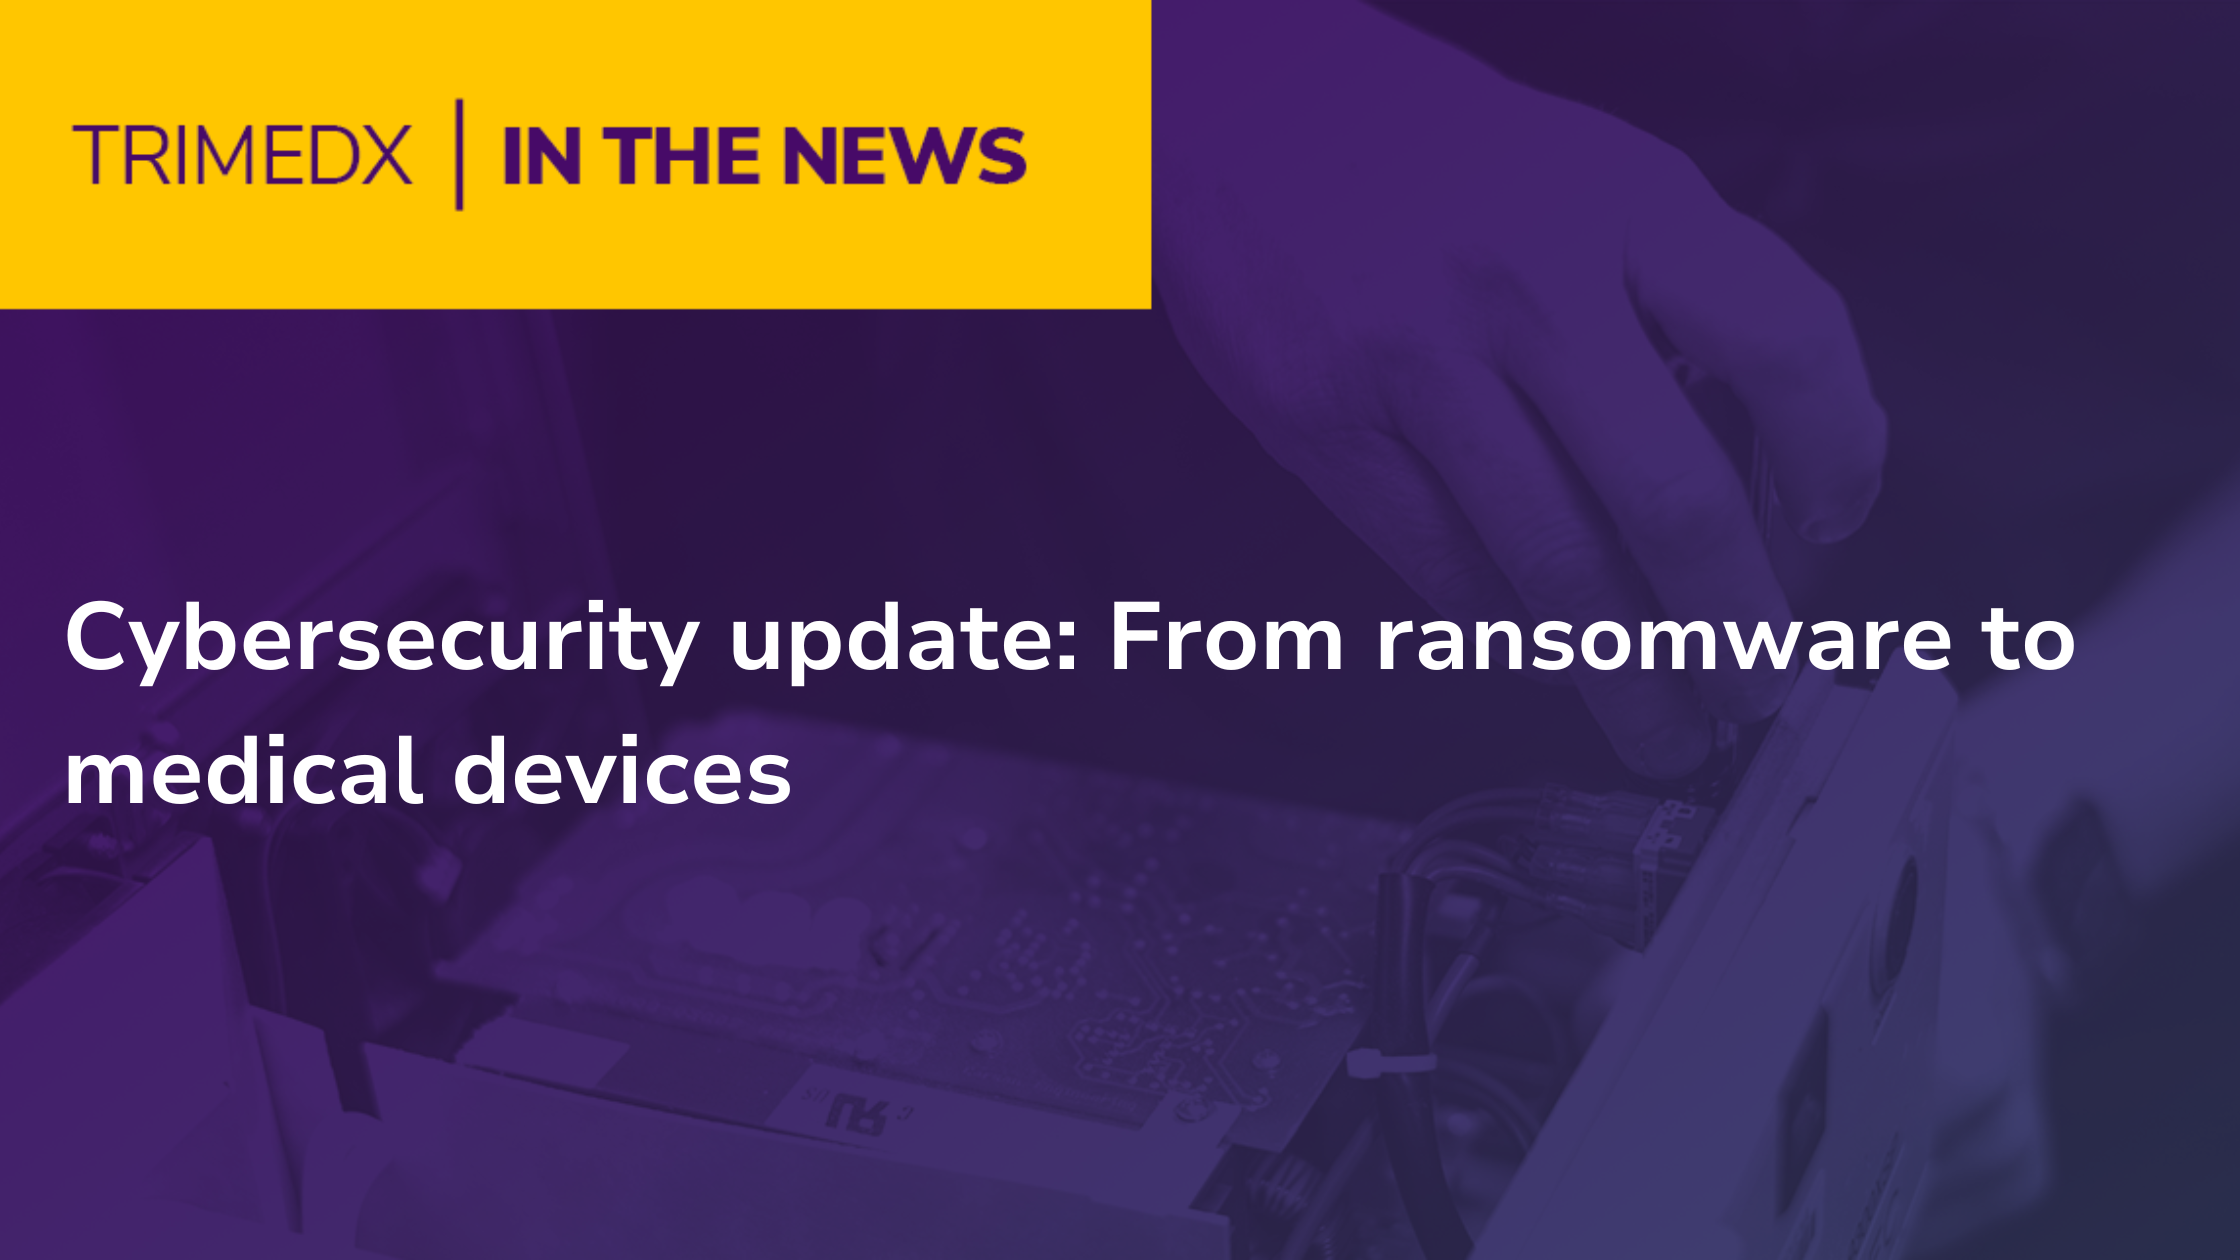 Cybersecurity update: From ransomware to medical devices